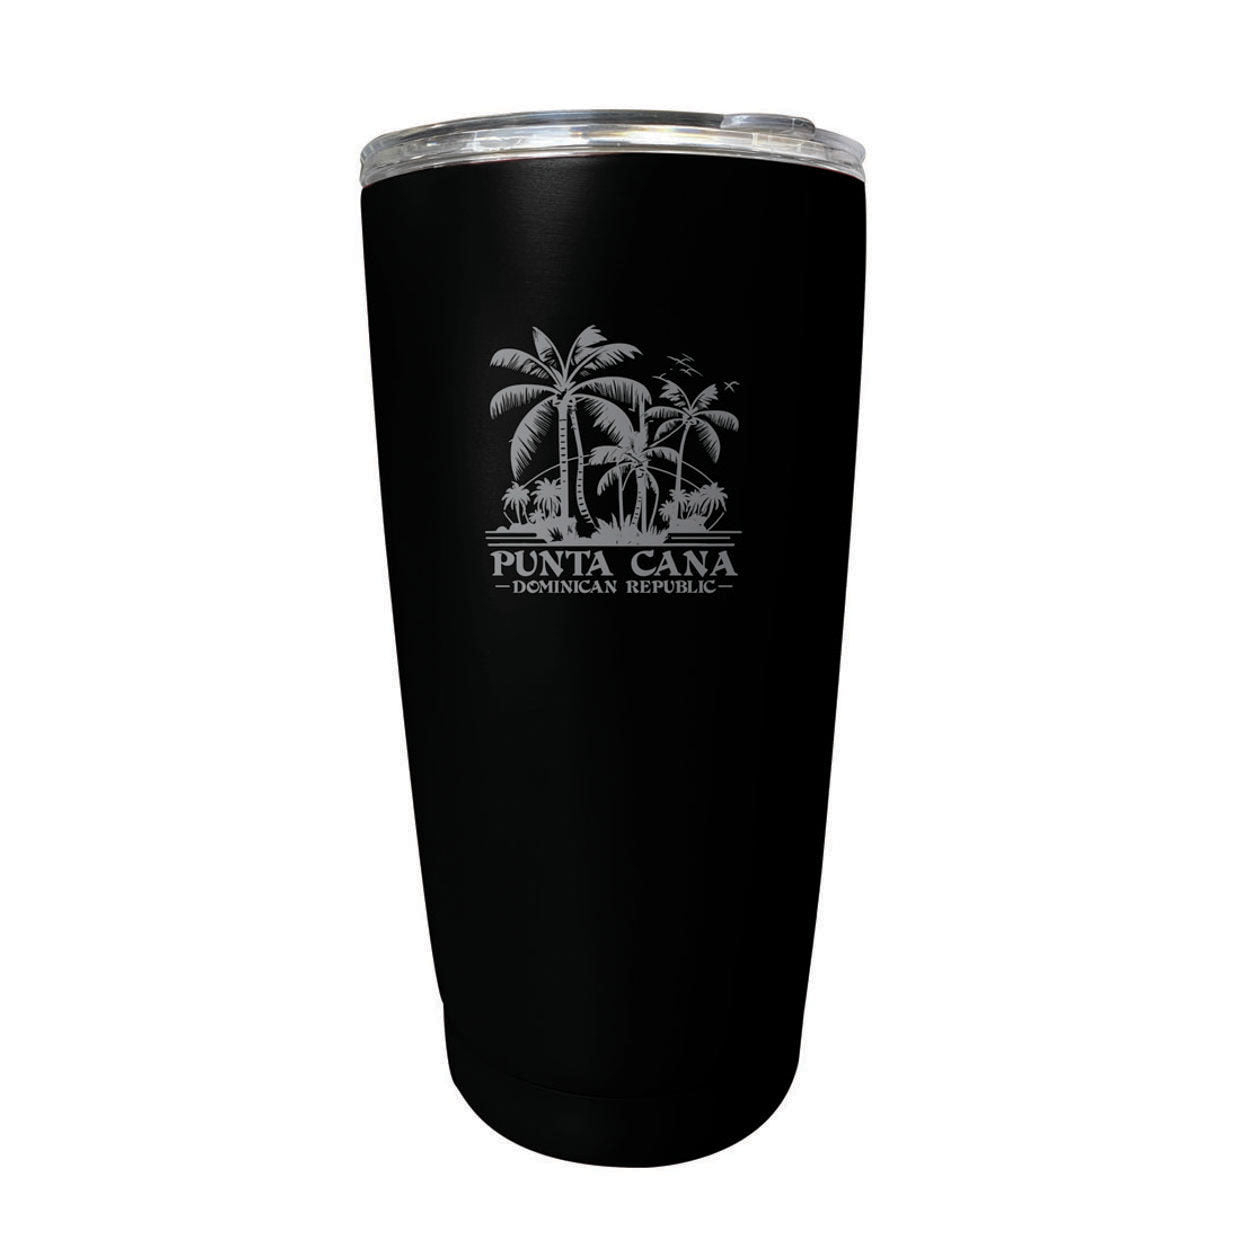 Punta Cana Dominican Republic Souvenir 16 Oz Stainless Steel Insulated Tumbler Etched - Purple, PALMS